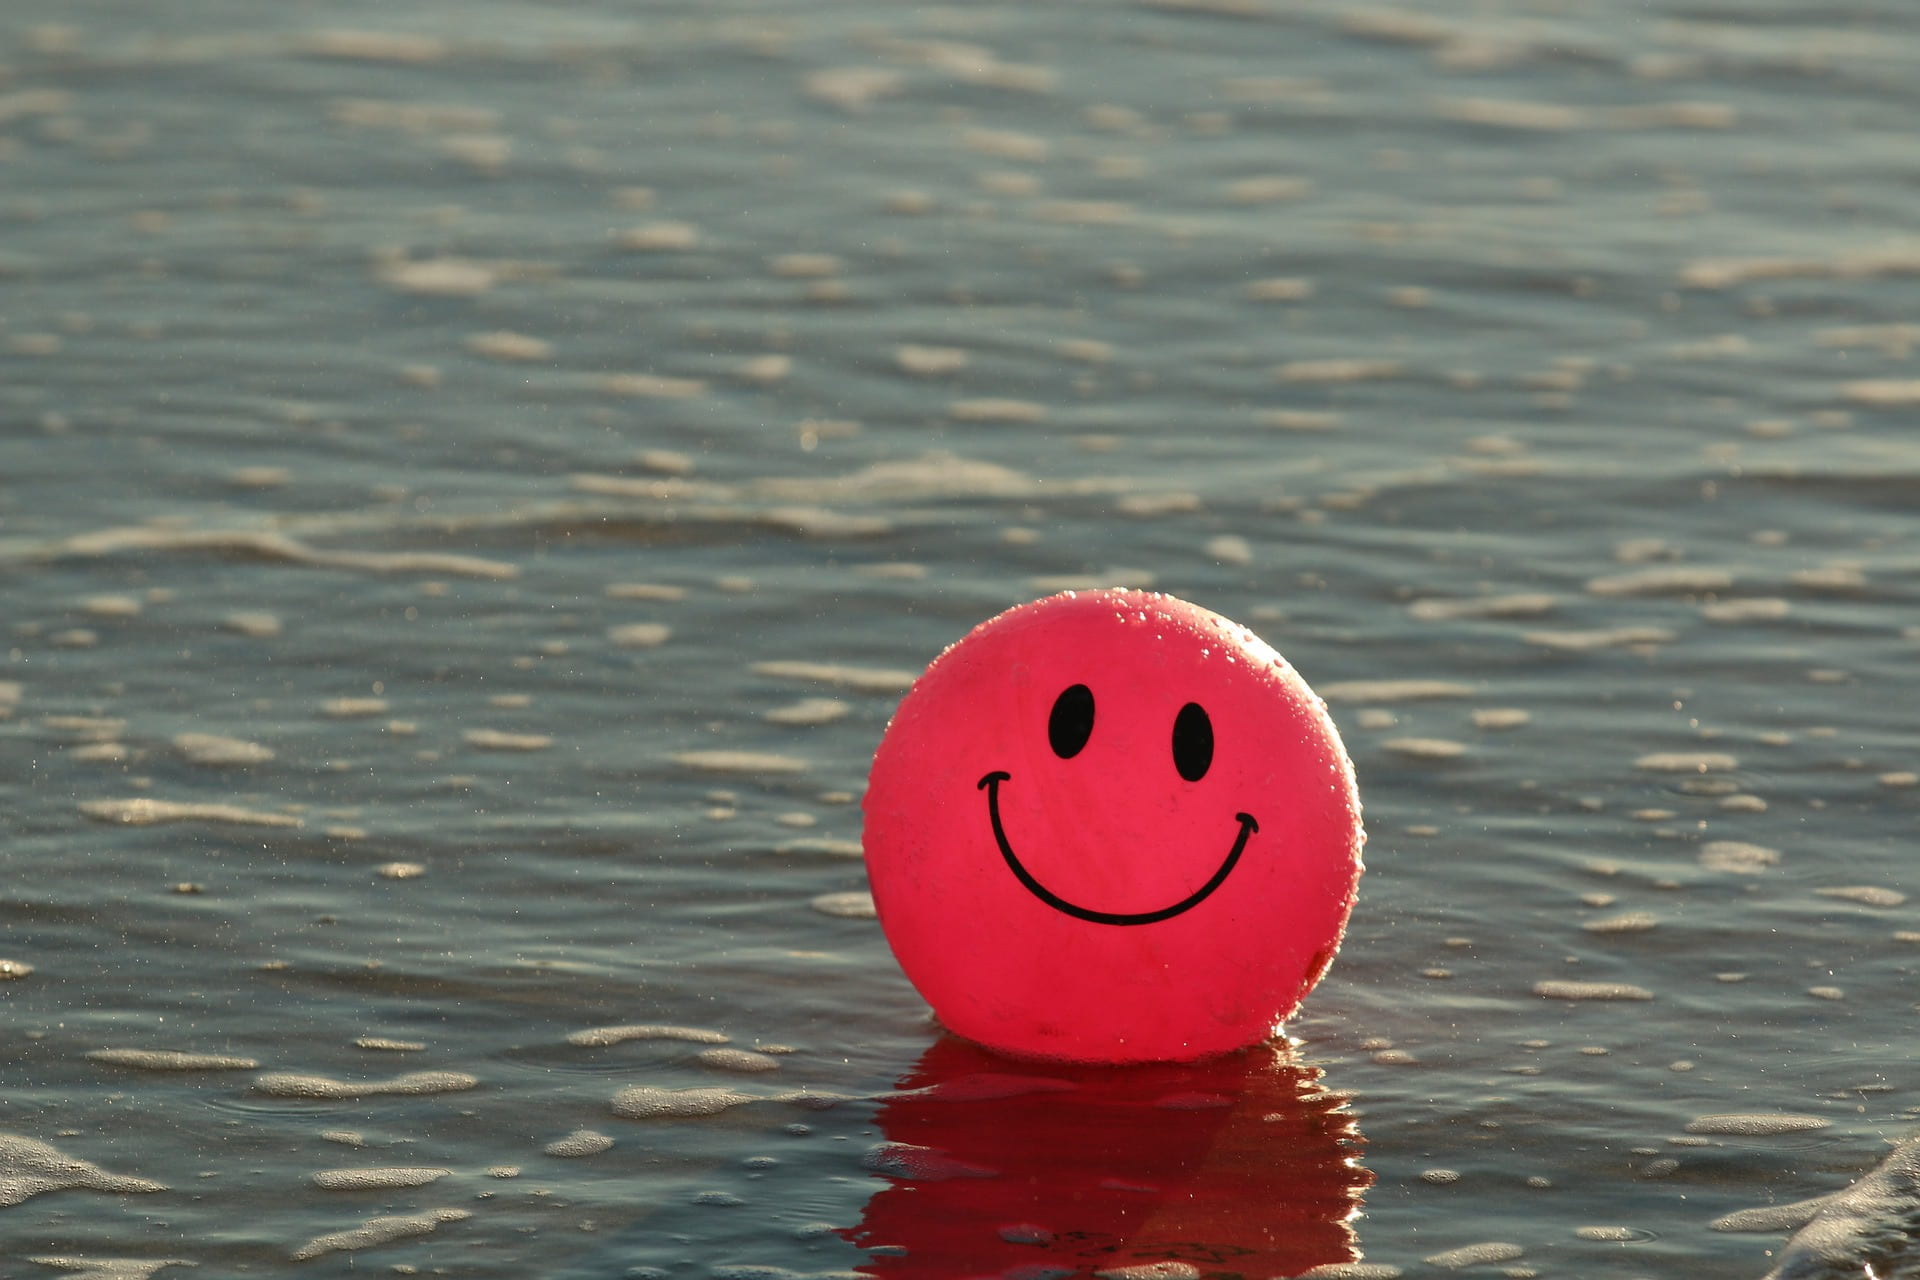  Image of a red ball with a smiley face on it, floating in water.